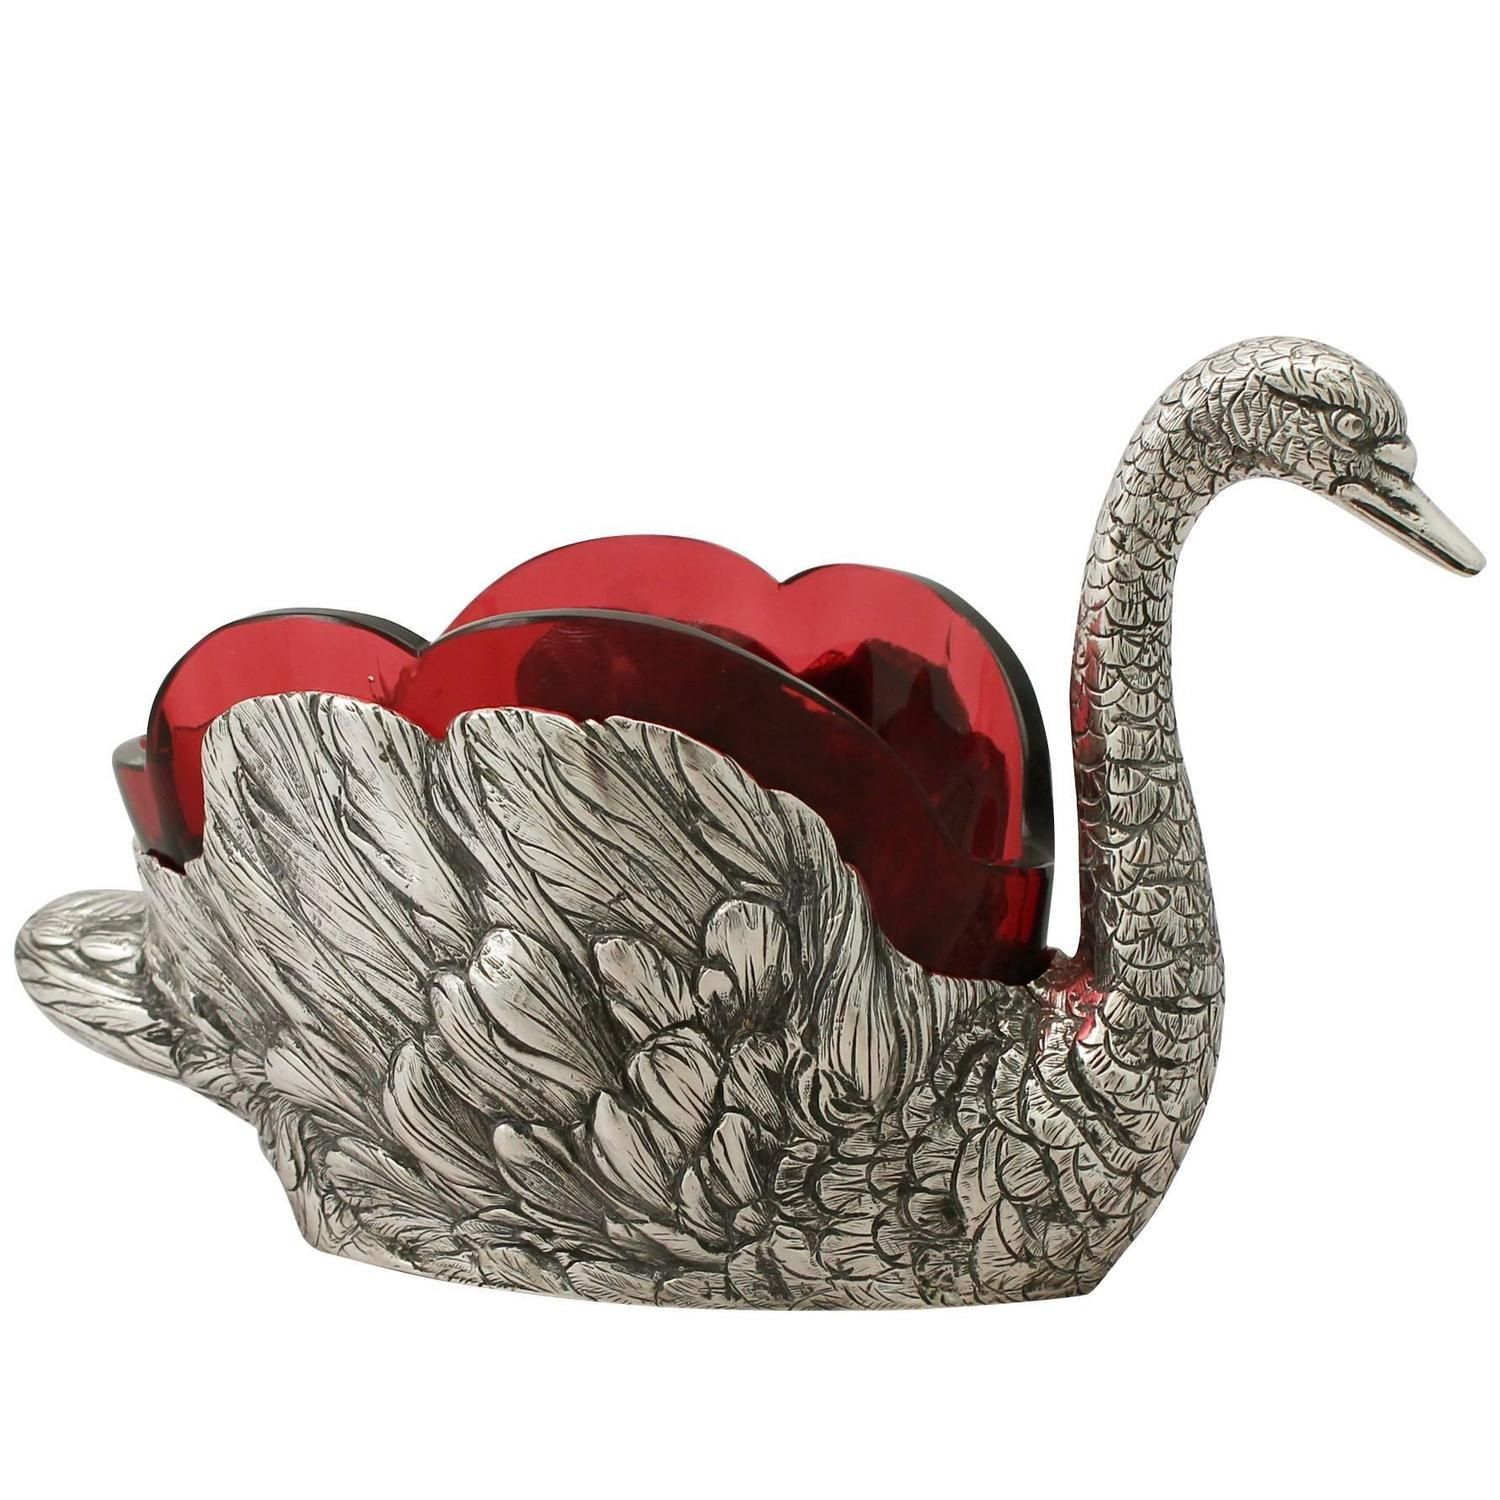 hand blown glass swan vases of italian silver and cranberry colored glass swan centrepiece intended for italian silver and cranberry coloured glass swan centrepiece antique from a unique